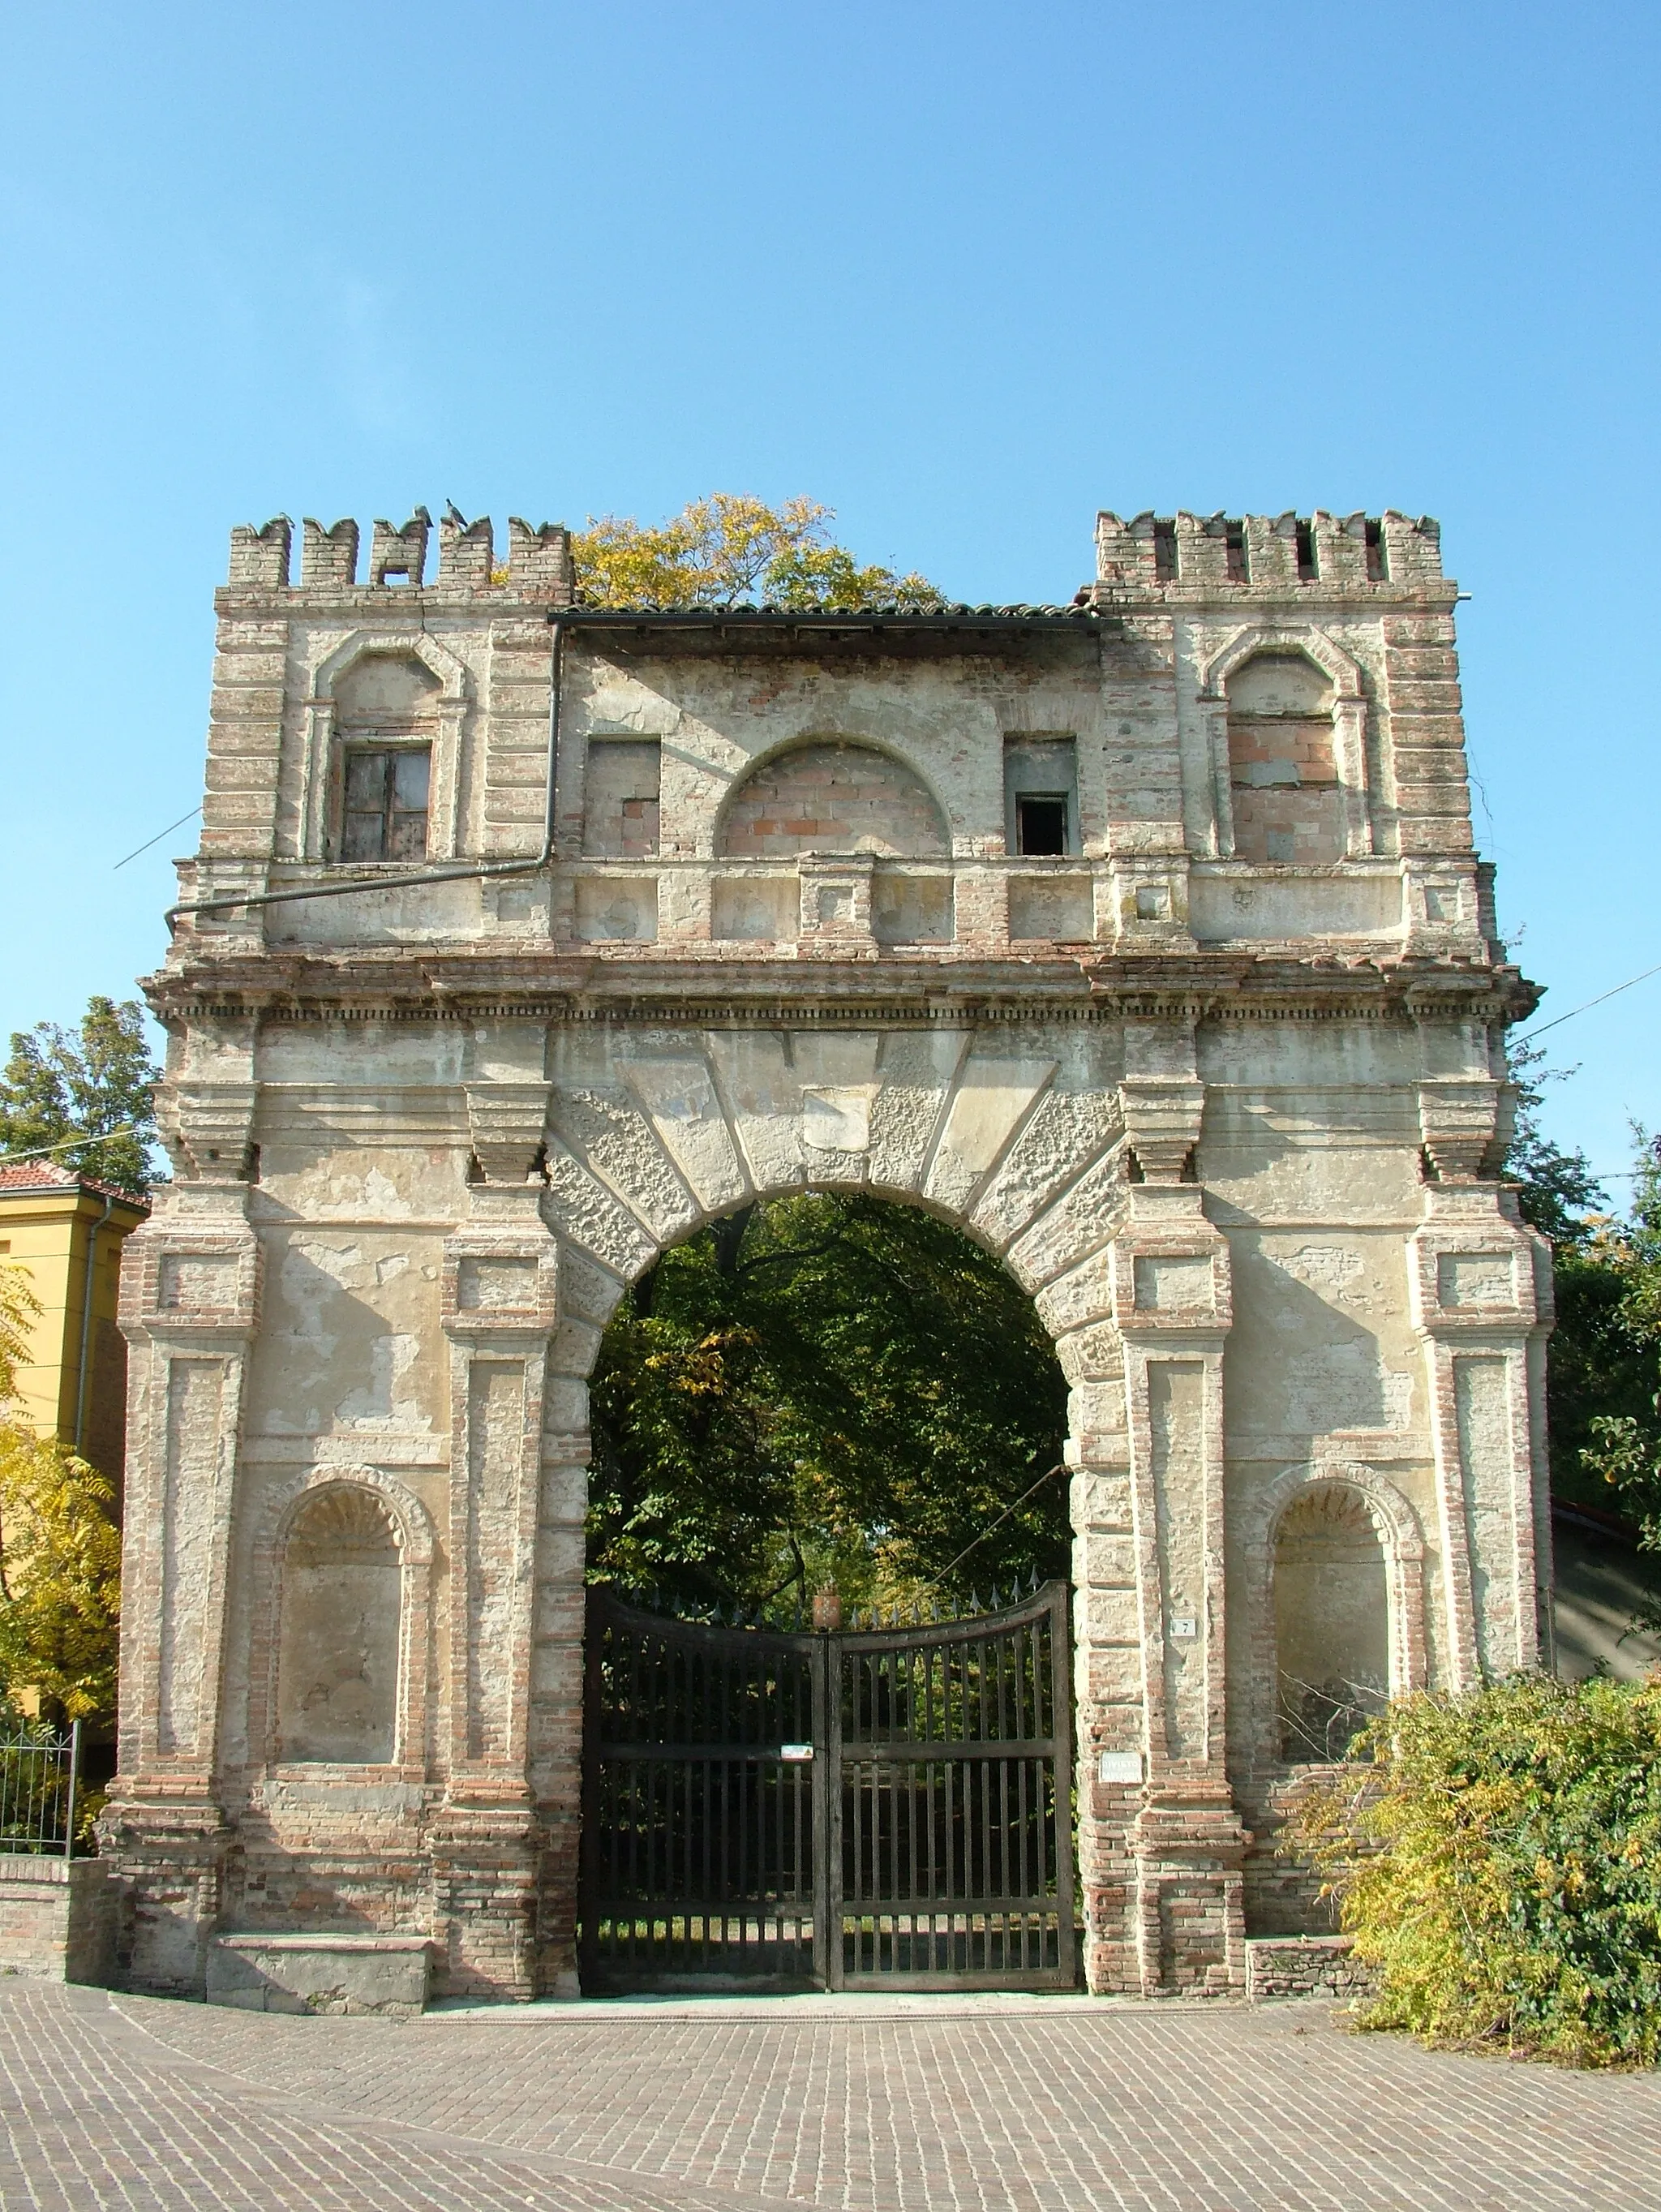 Photo showing: Italy, province of Parma, Collecchio, Arch of Bargello, entrance to the park of Villa Paveri Fontana